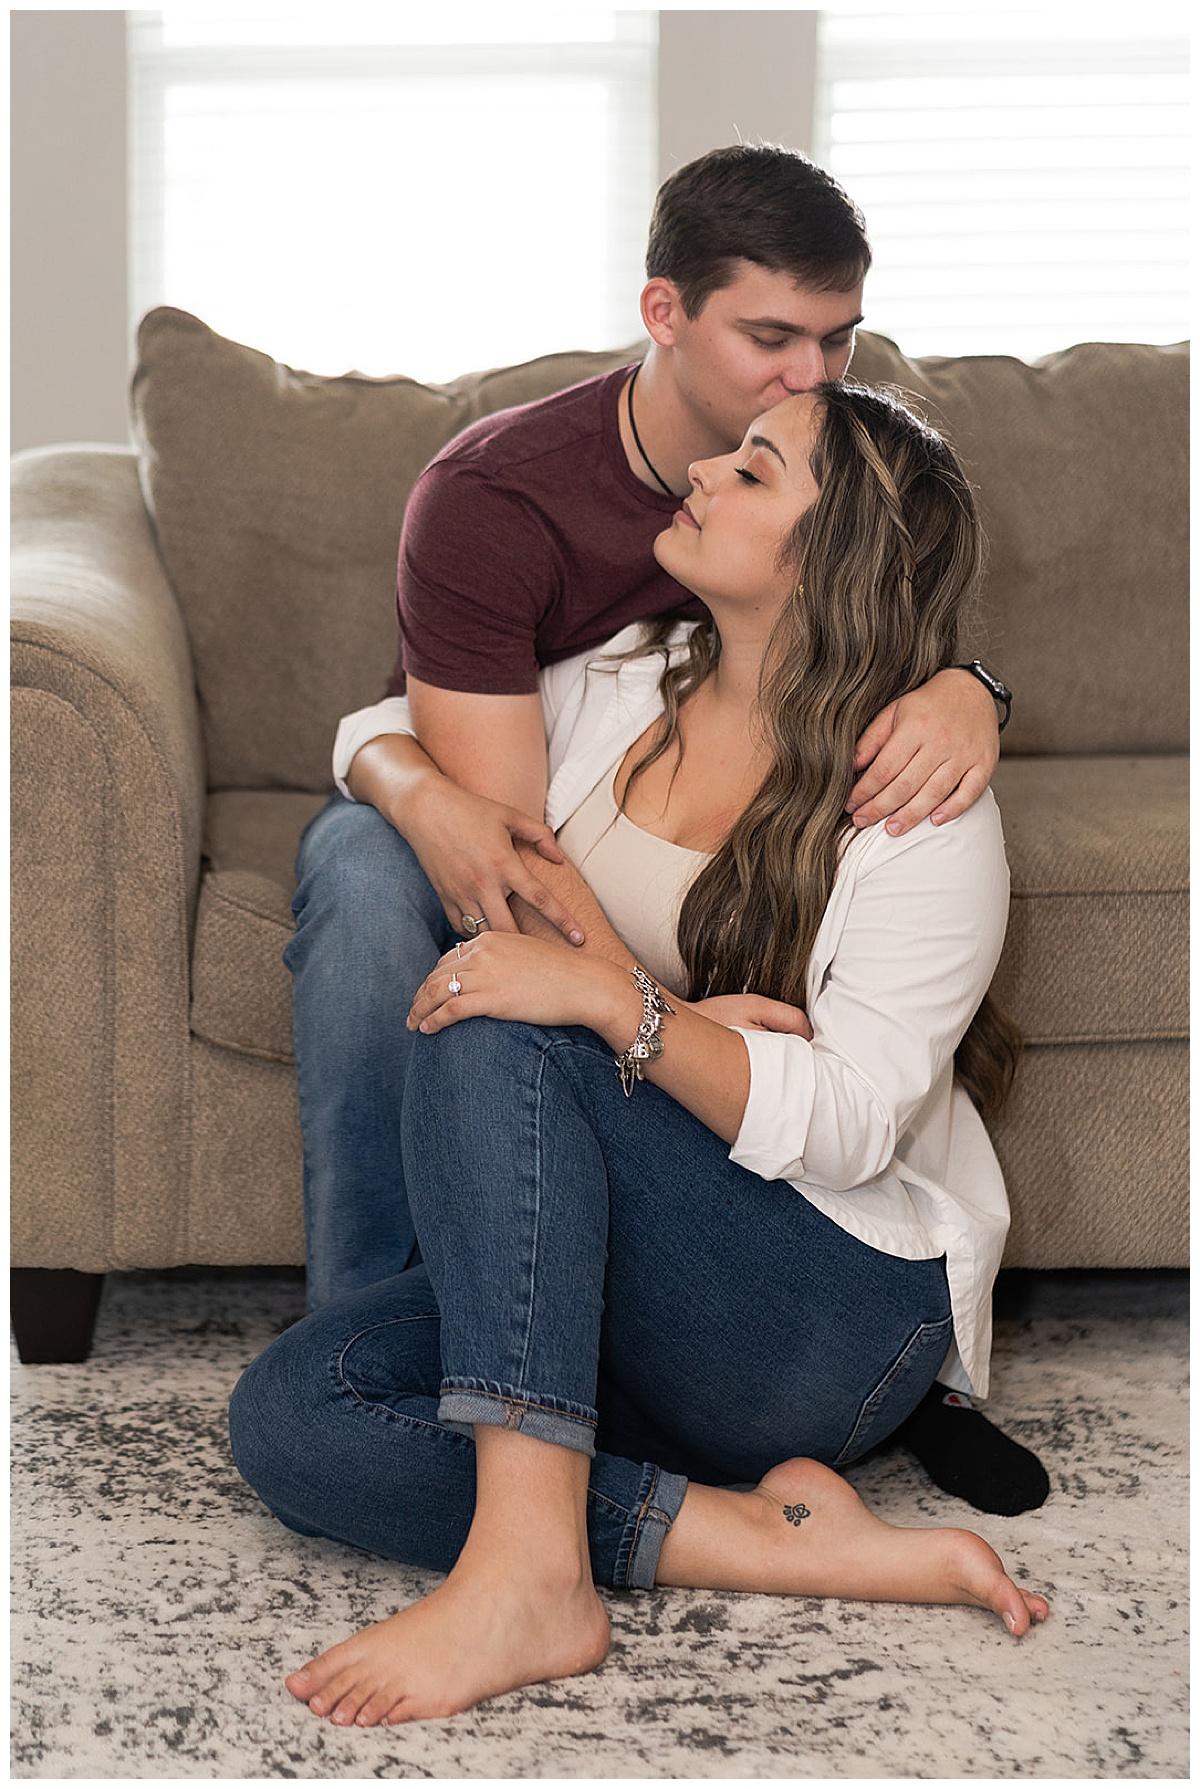 Man and woman share tender moments for At-Home Engagement Photos